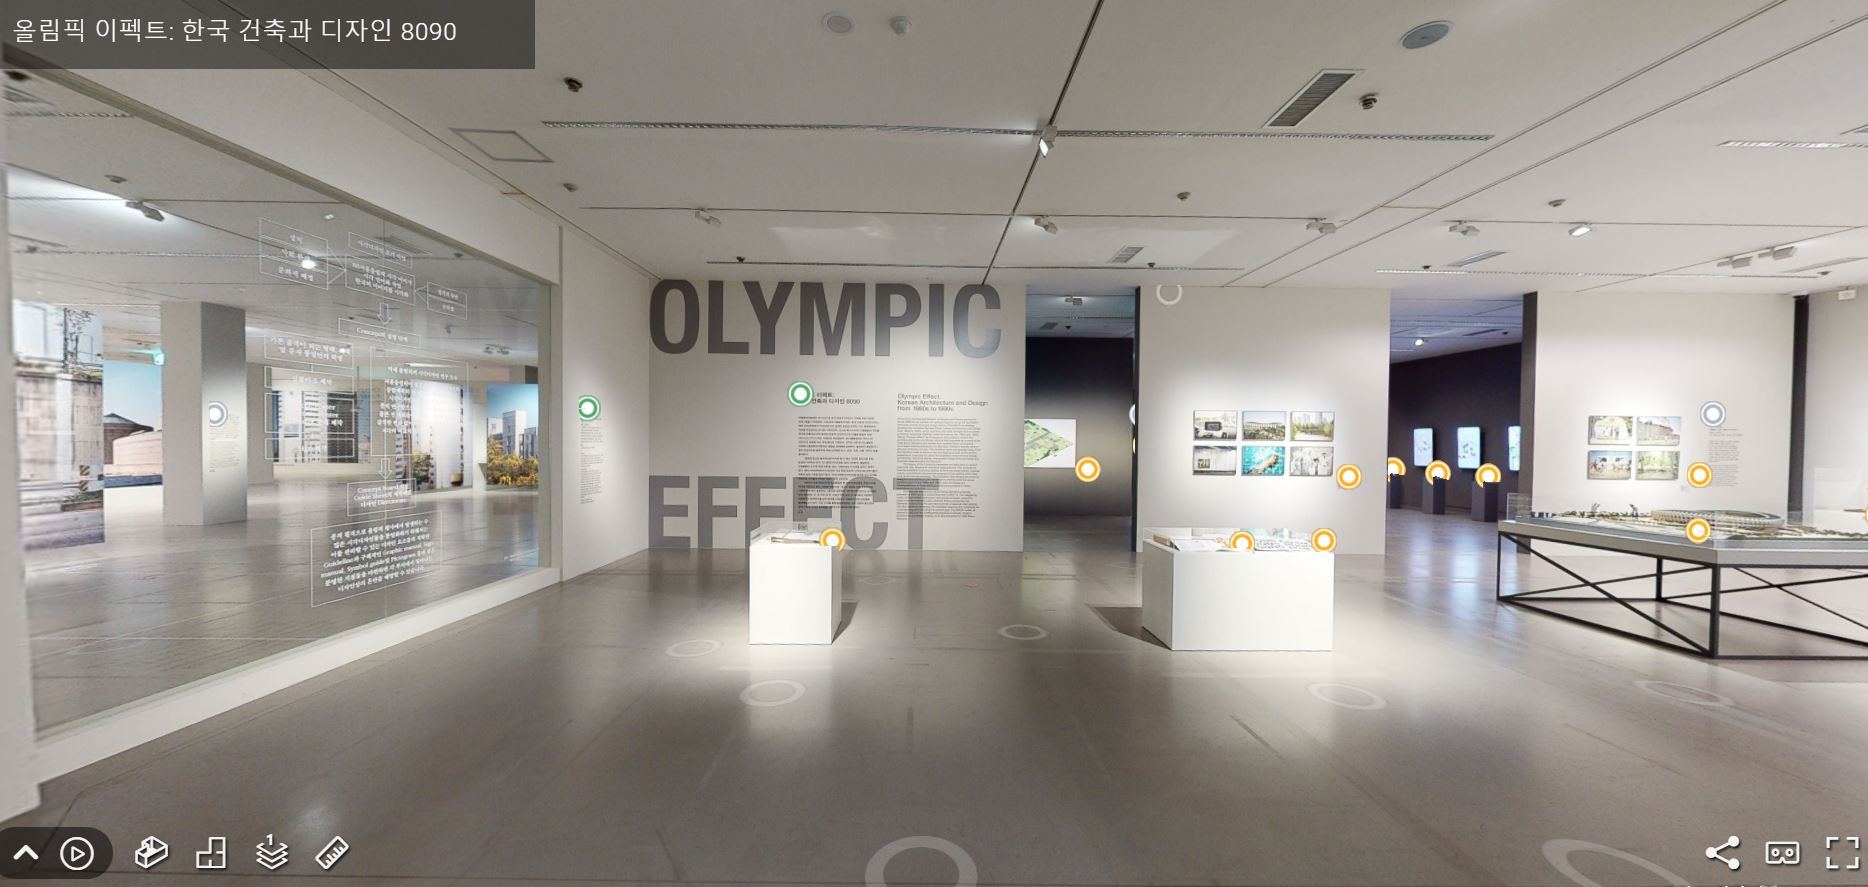 VR Tour for Olympic Effect: Korean Architecture and Design from 1980s to 1990s